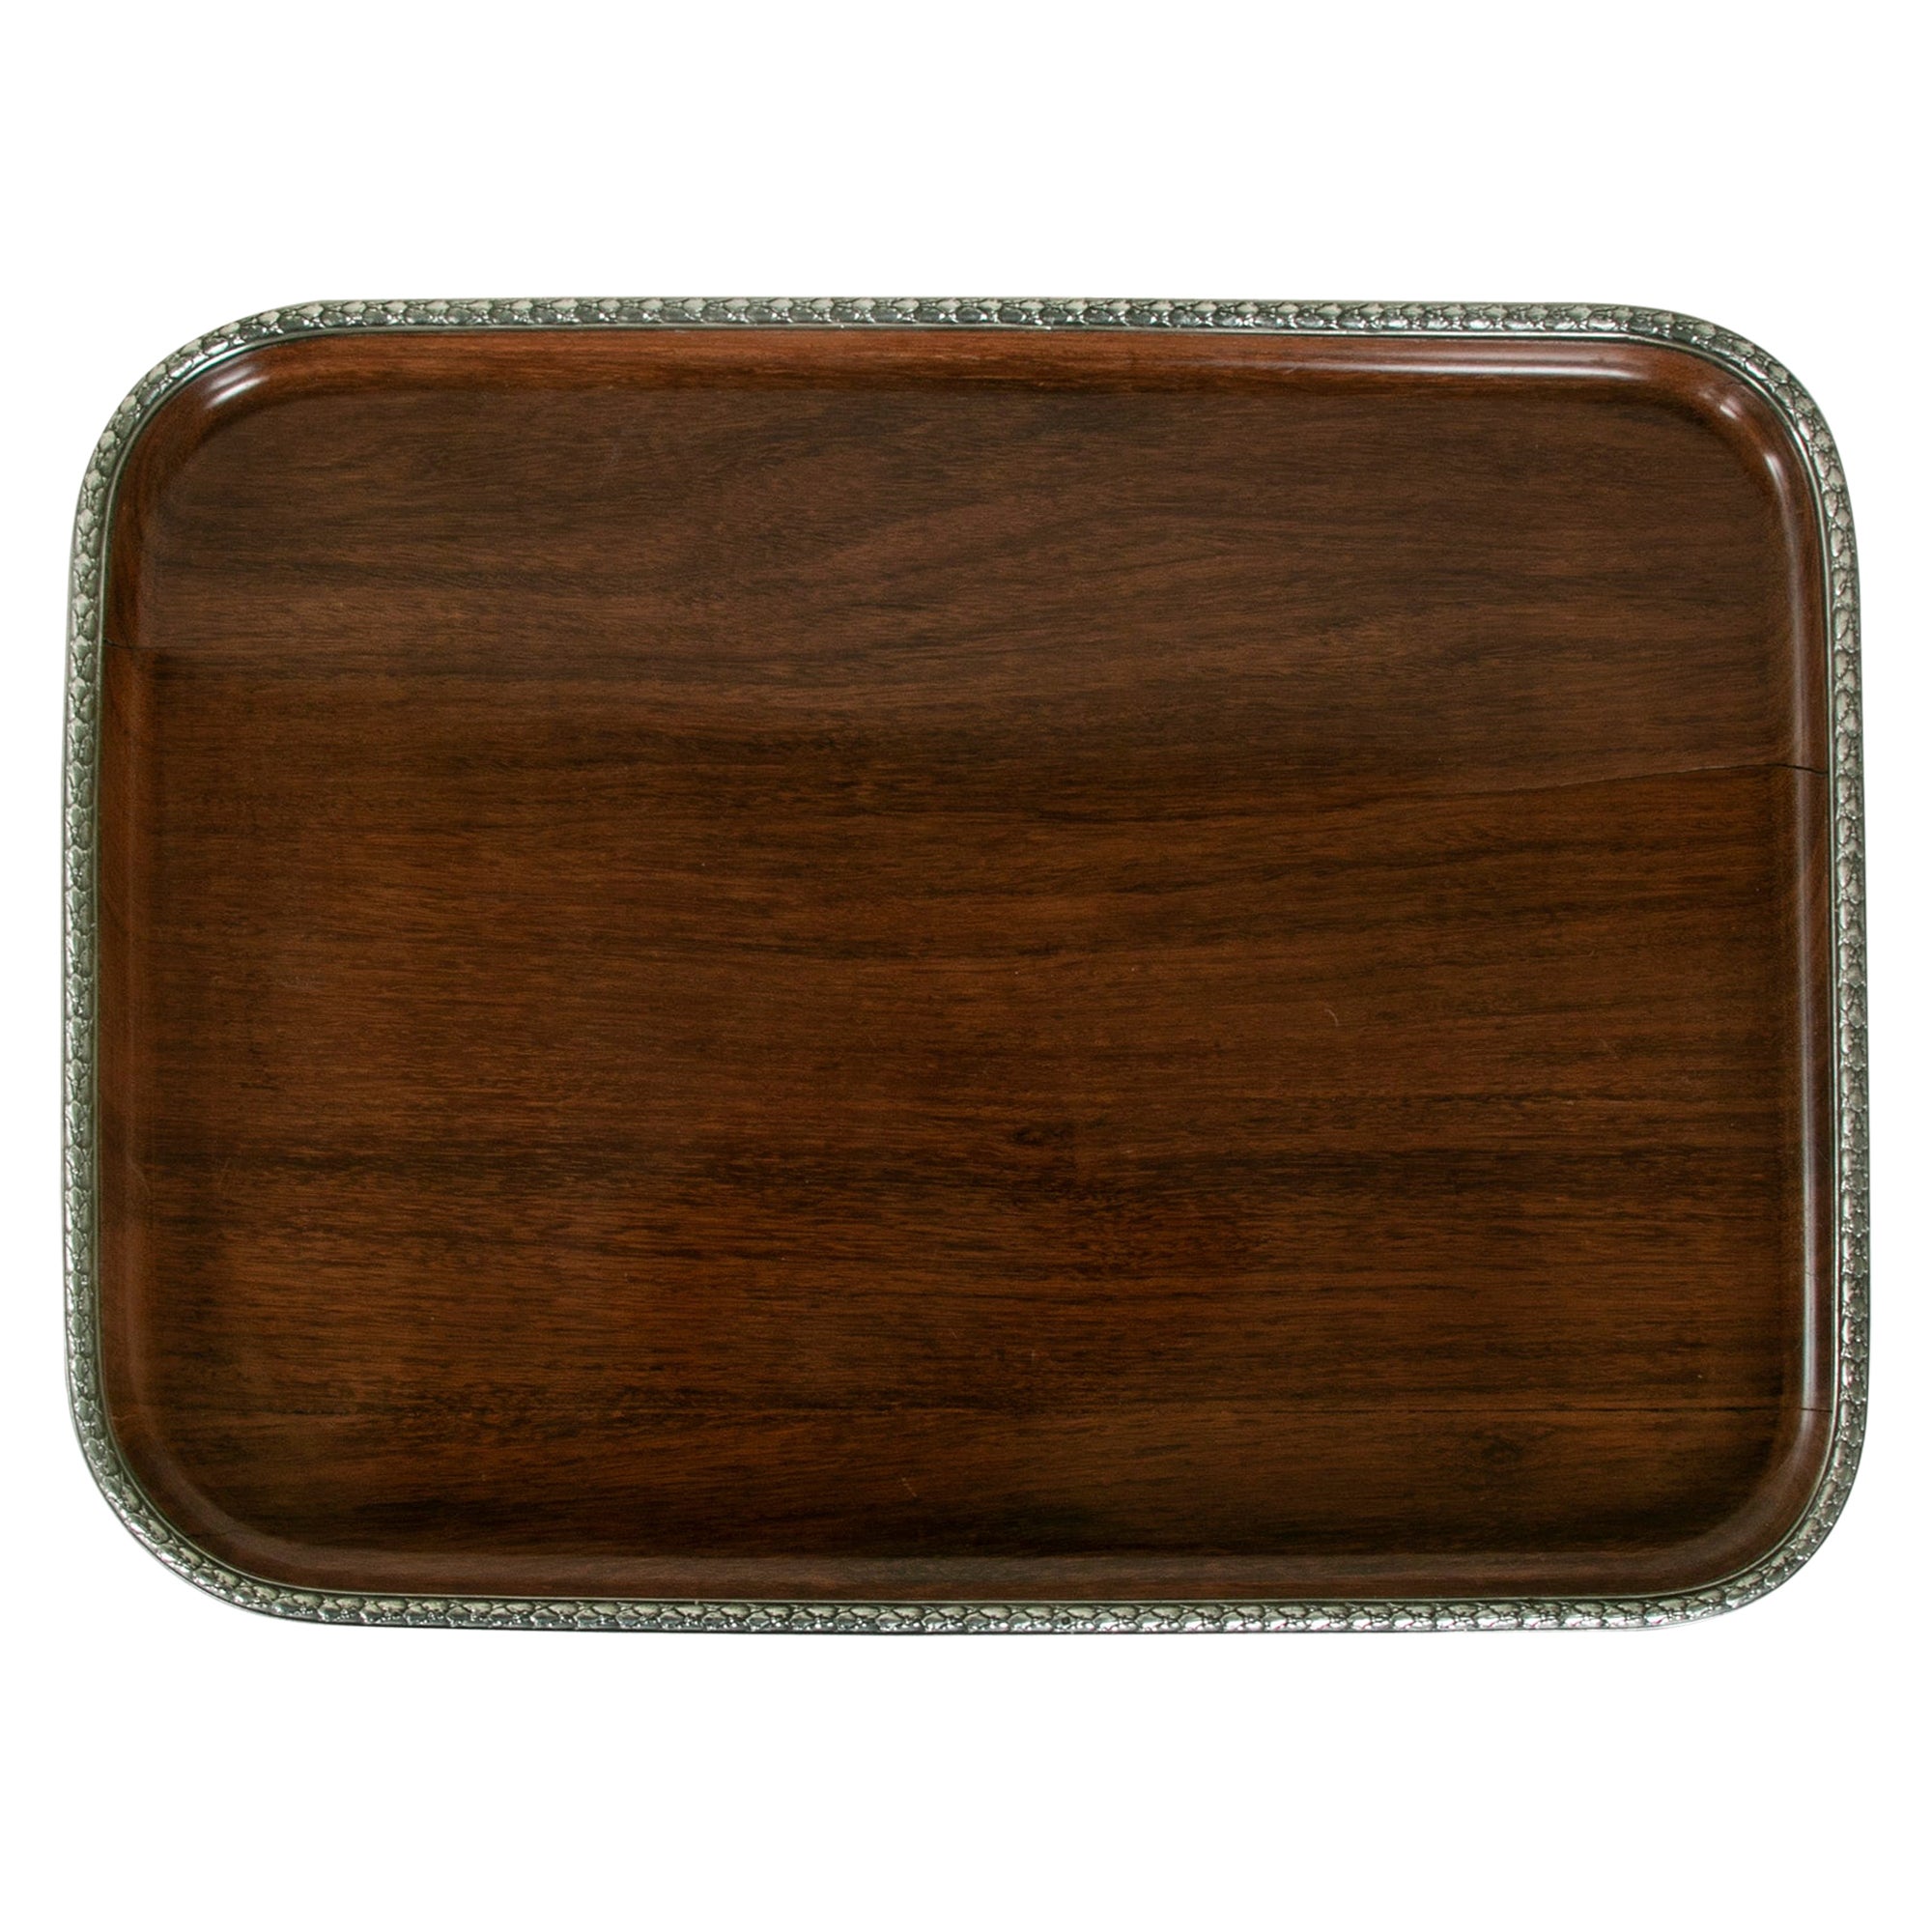 Mid-19th Century French Napoleon III Period Rosewood and Silver Serving Tray